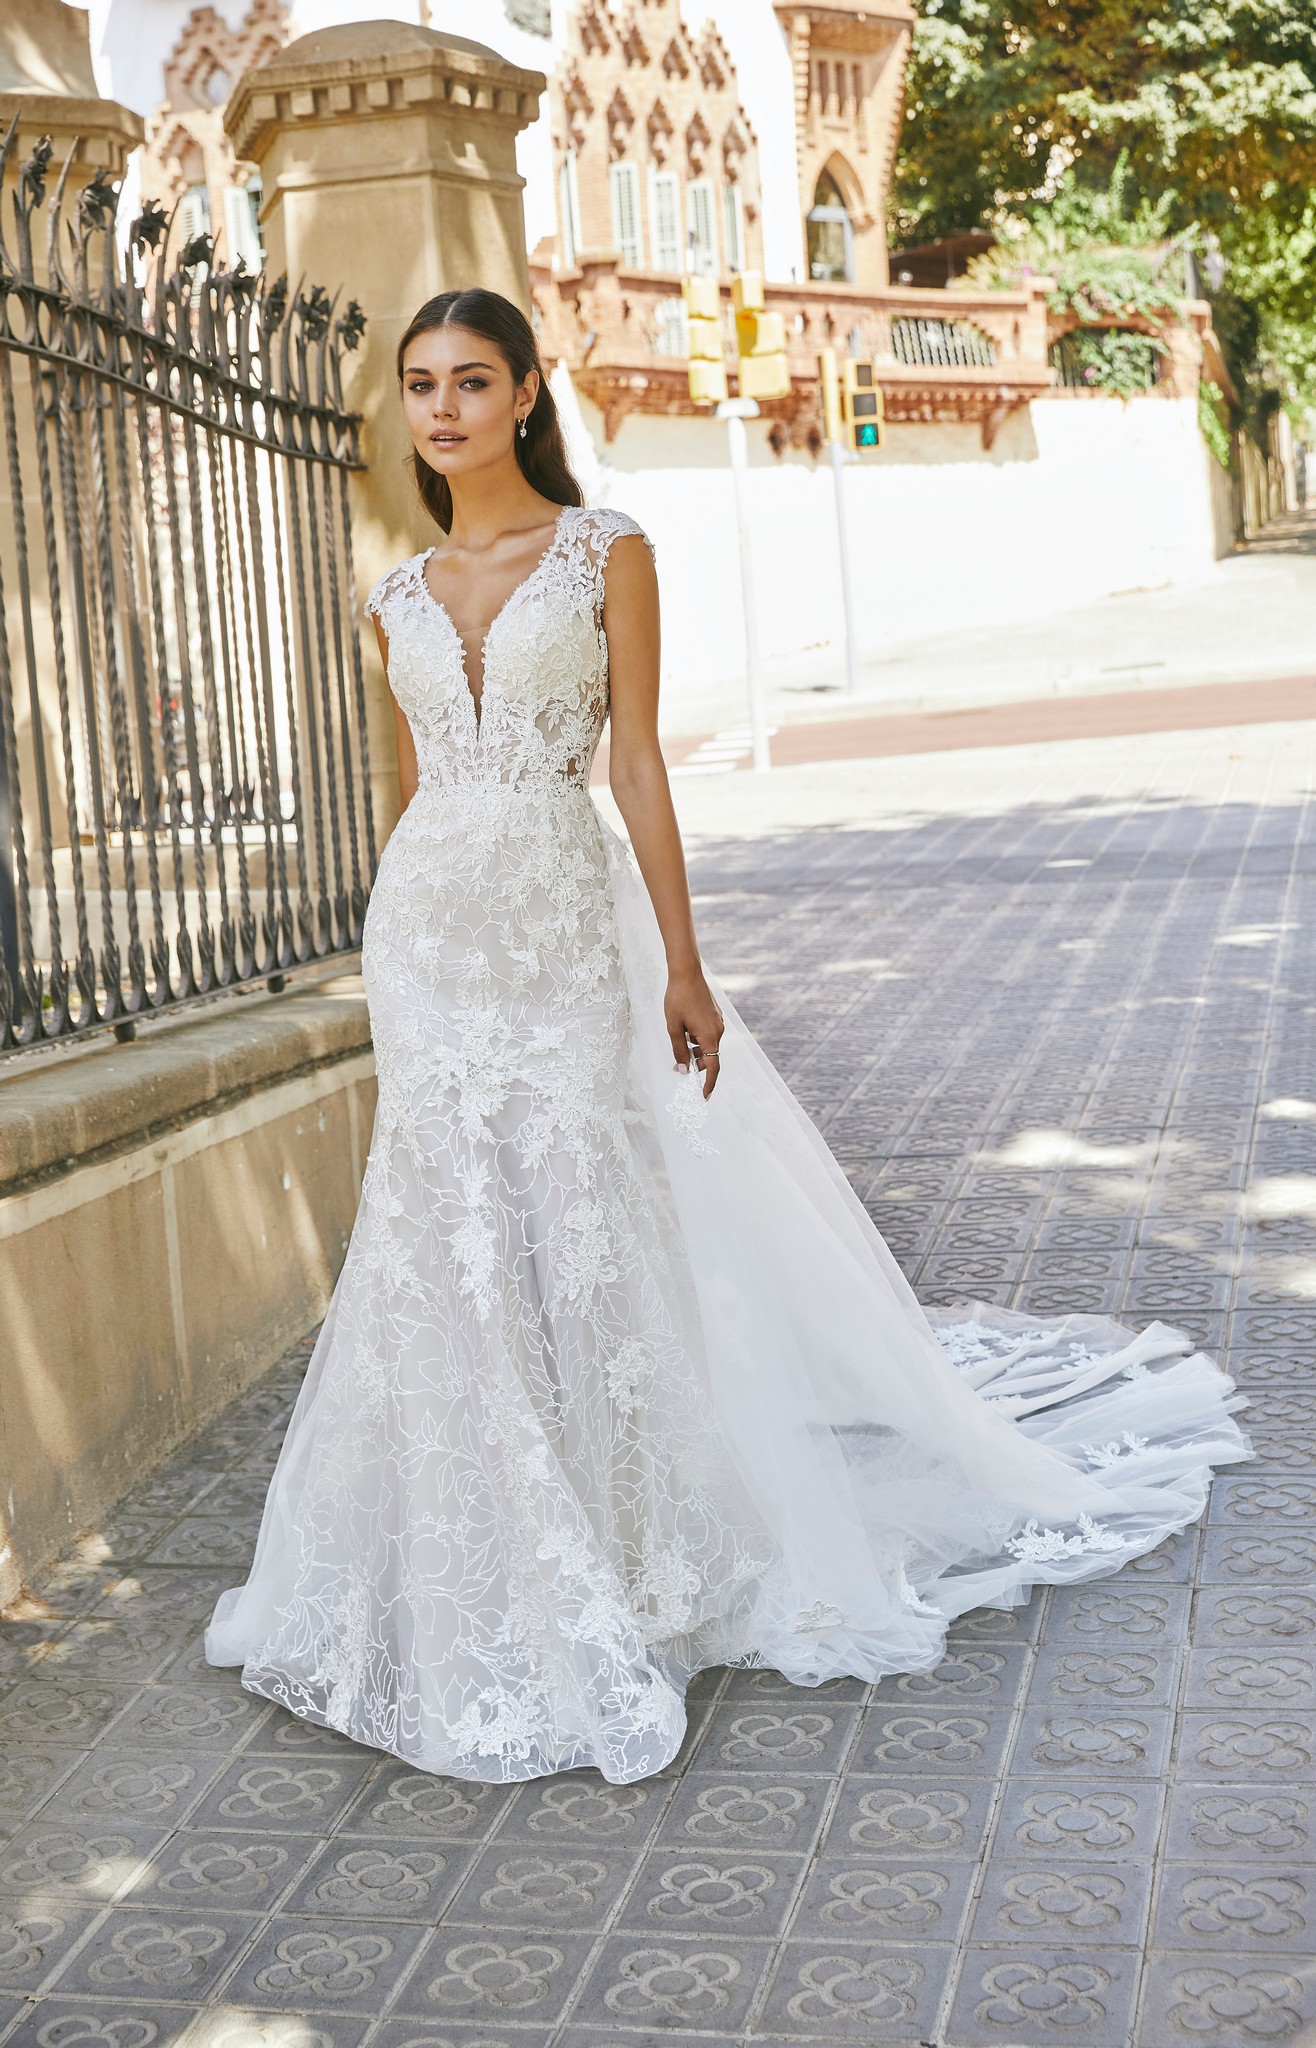 Brunette model stood in a sunny street by black railing in Ronald Joyce 69721, a floral lace and tulle wedding dress style with cap sleeves, a plunging v-neckline and v-shaped open back.